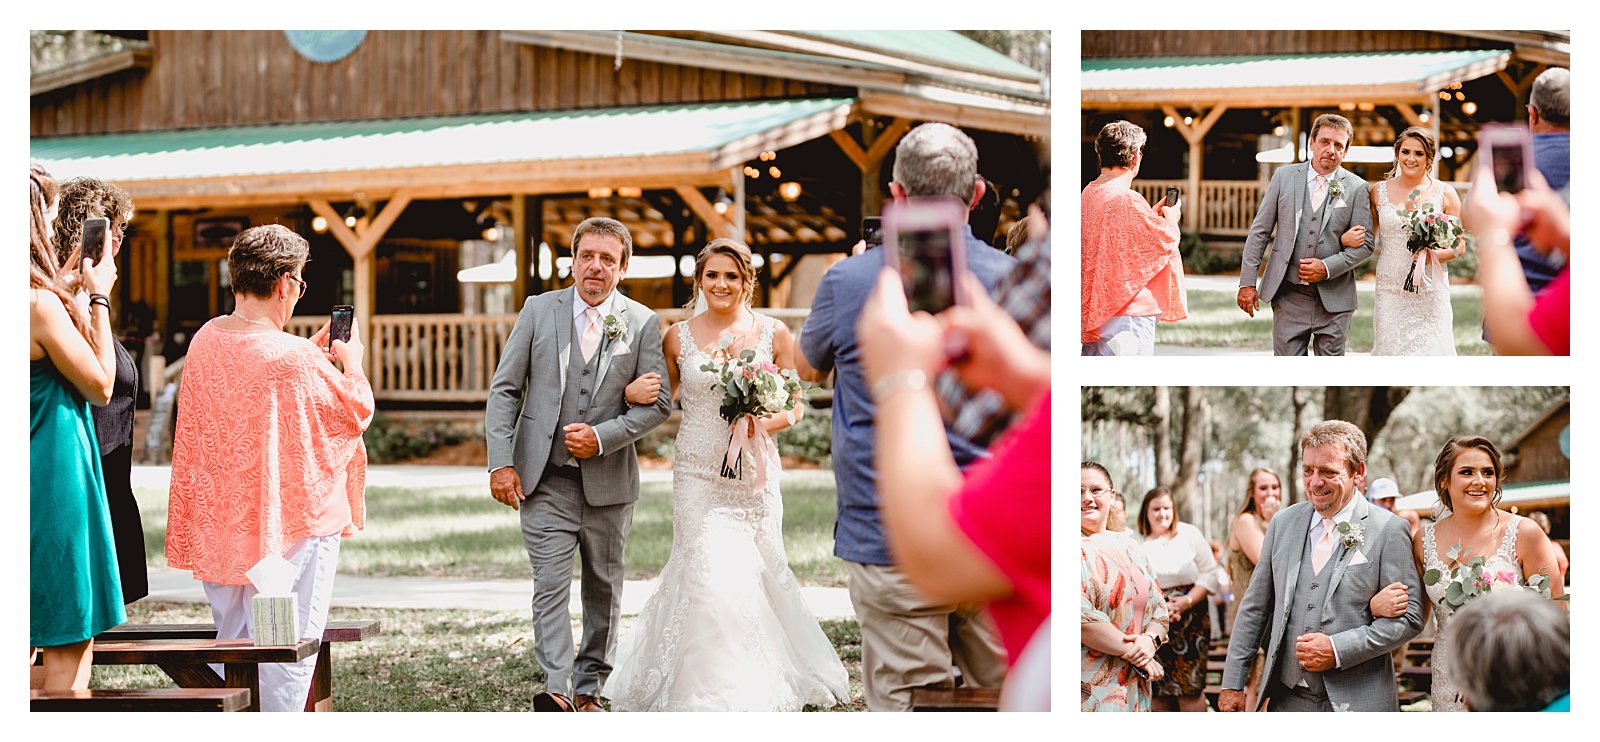 Dad walks his bride down the aisle to get married. Tallahassee photographer, Shelly Williams photography